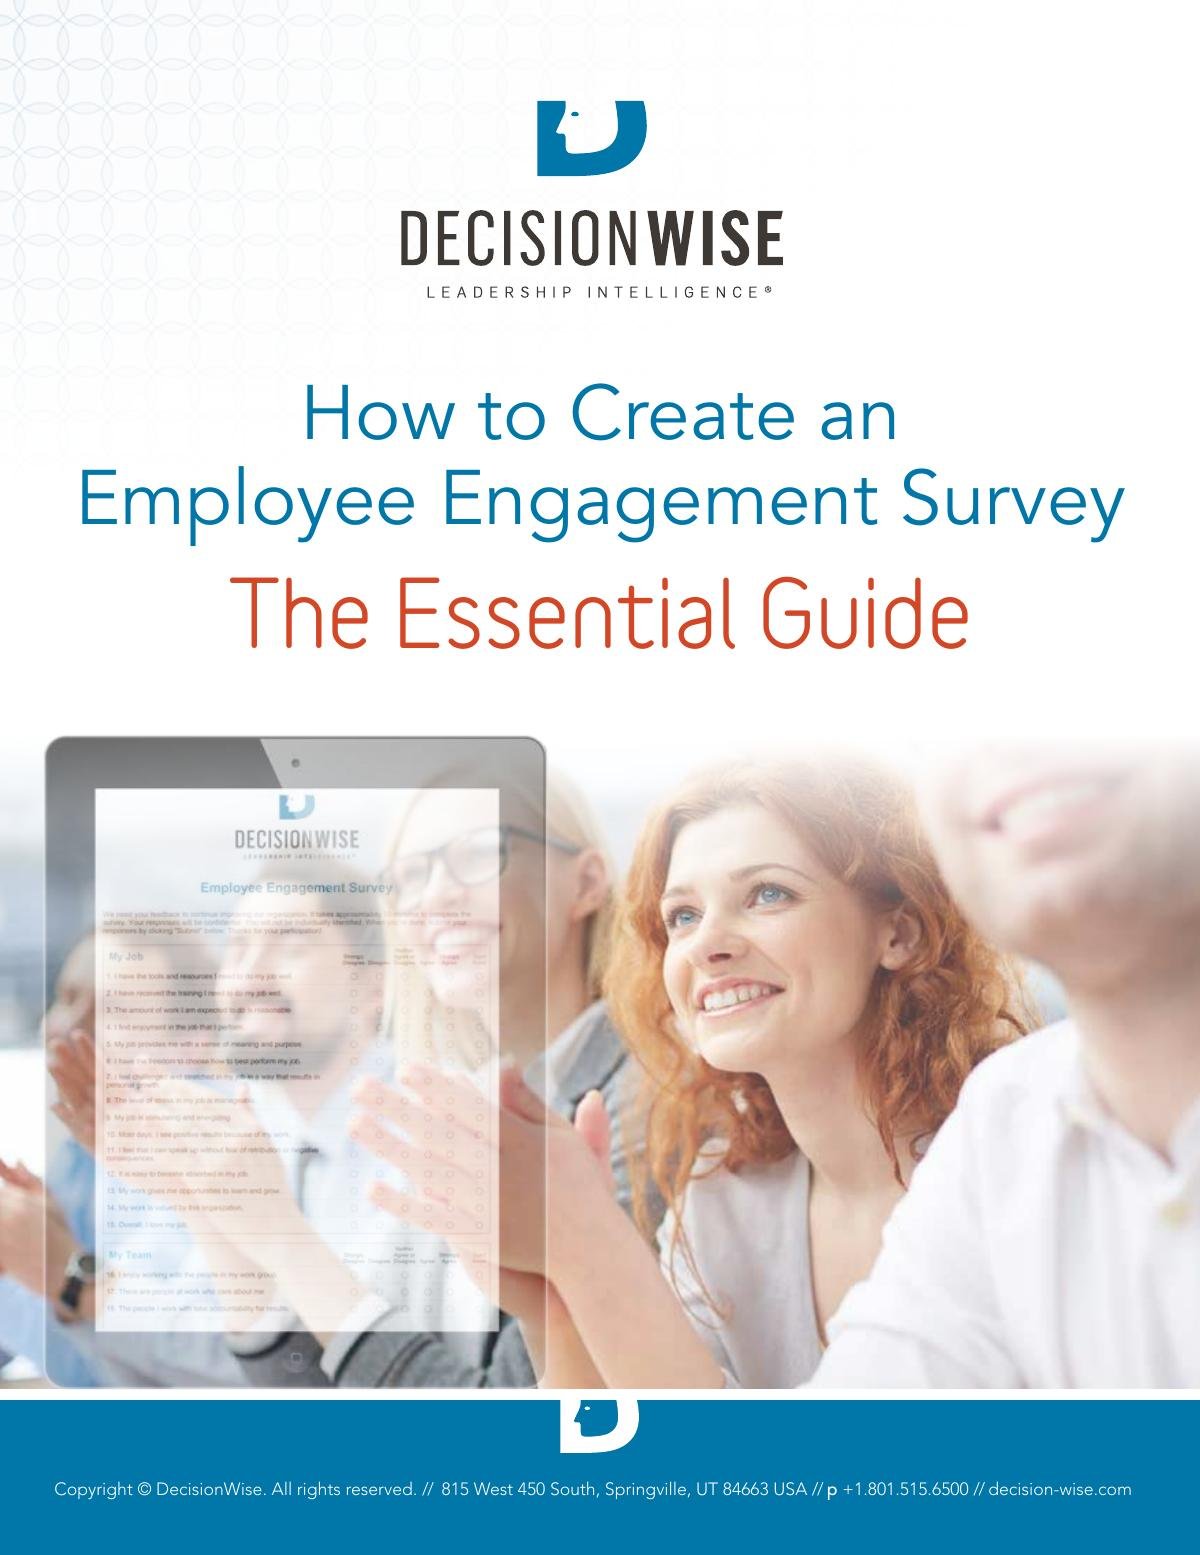 How to Create an Employee Engagement Survey - The Essential Guide